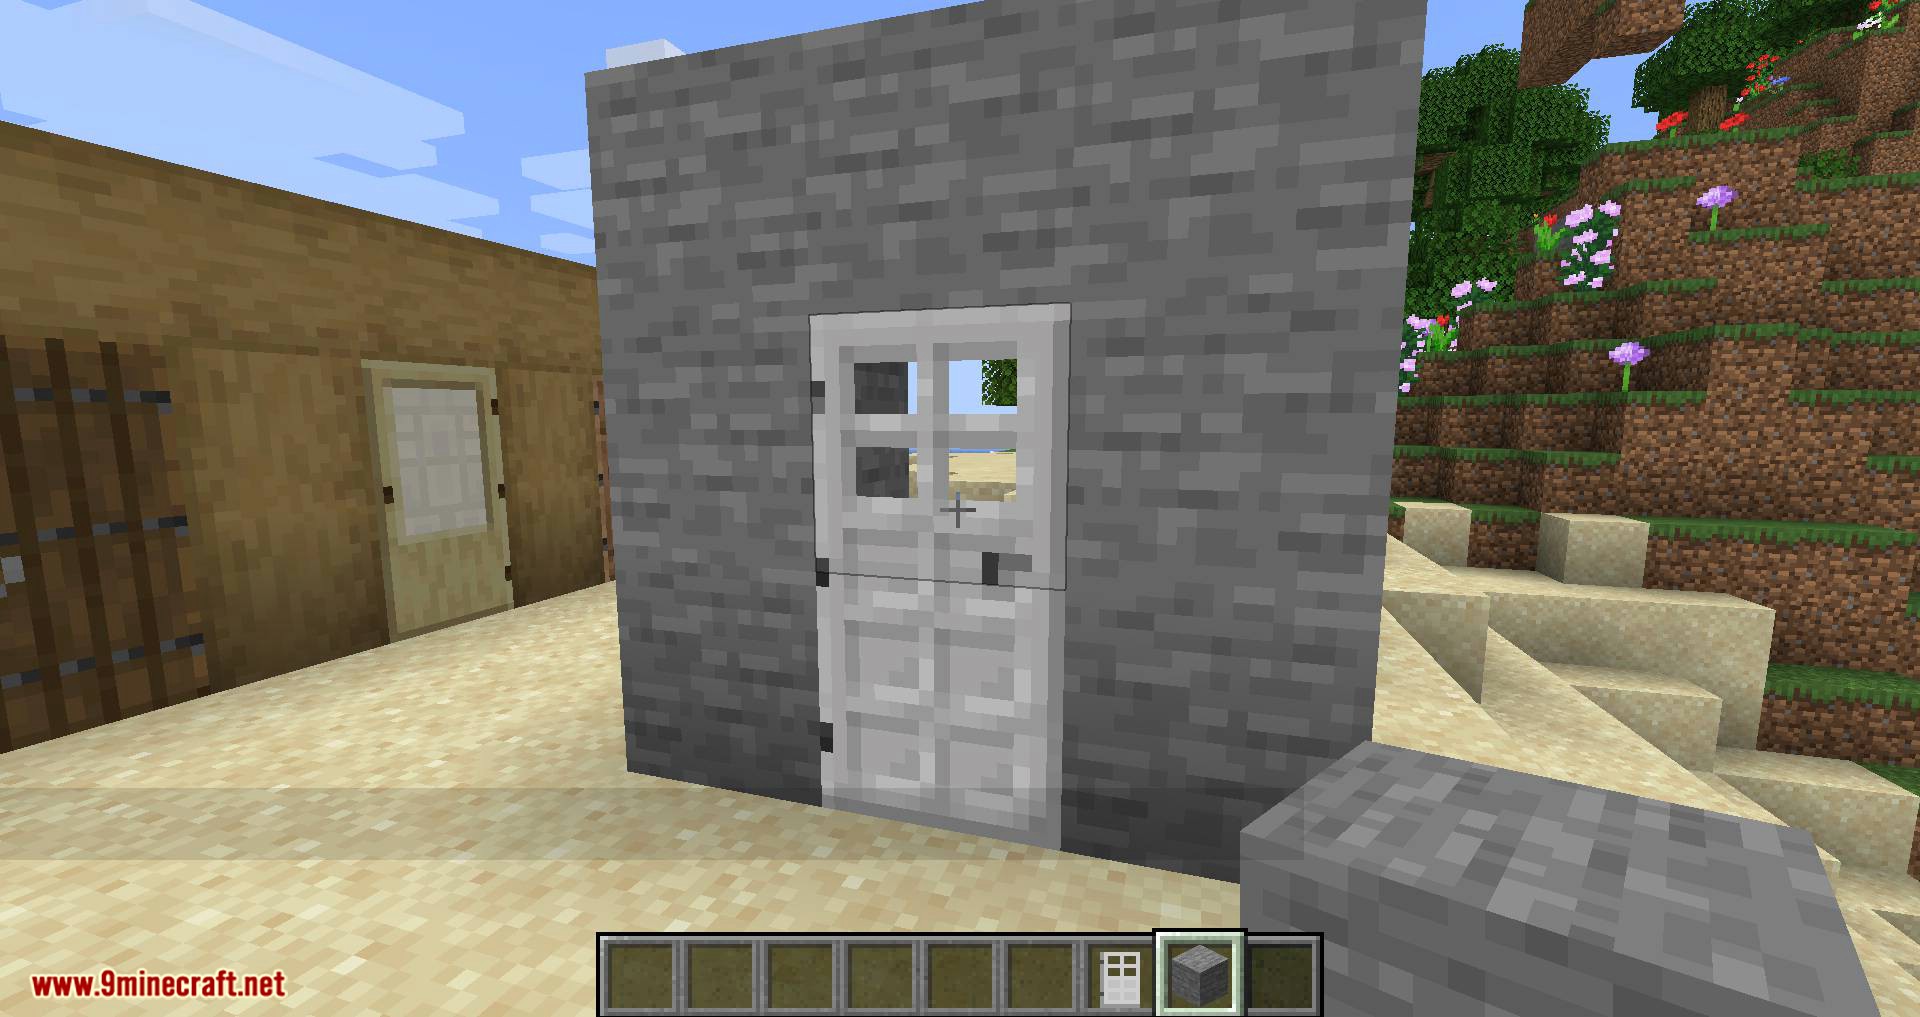 Automatic Door mod for minecraft 10